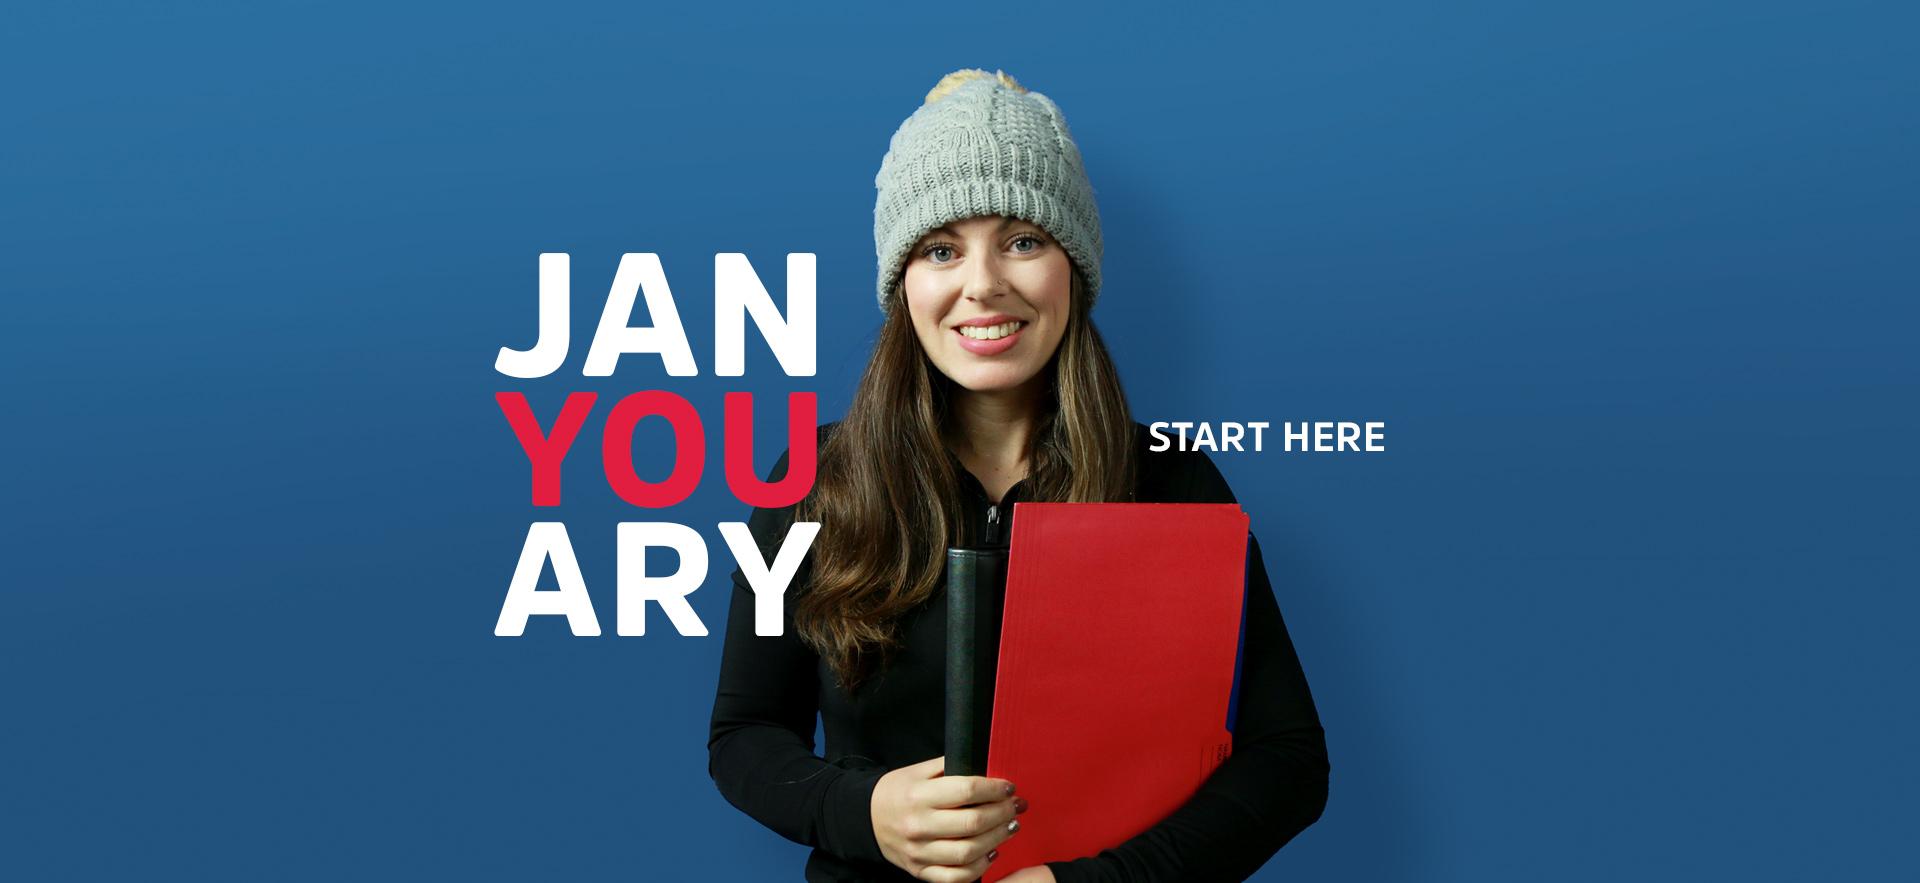 January Starts student holding folder wearing knit tuque with text JANYOUARY Start Here